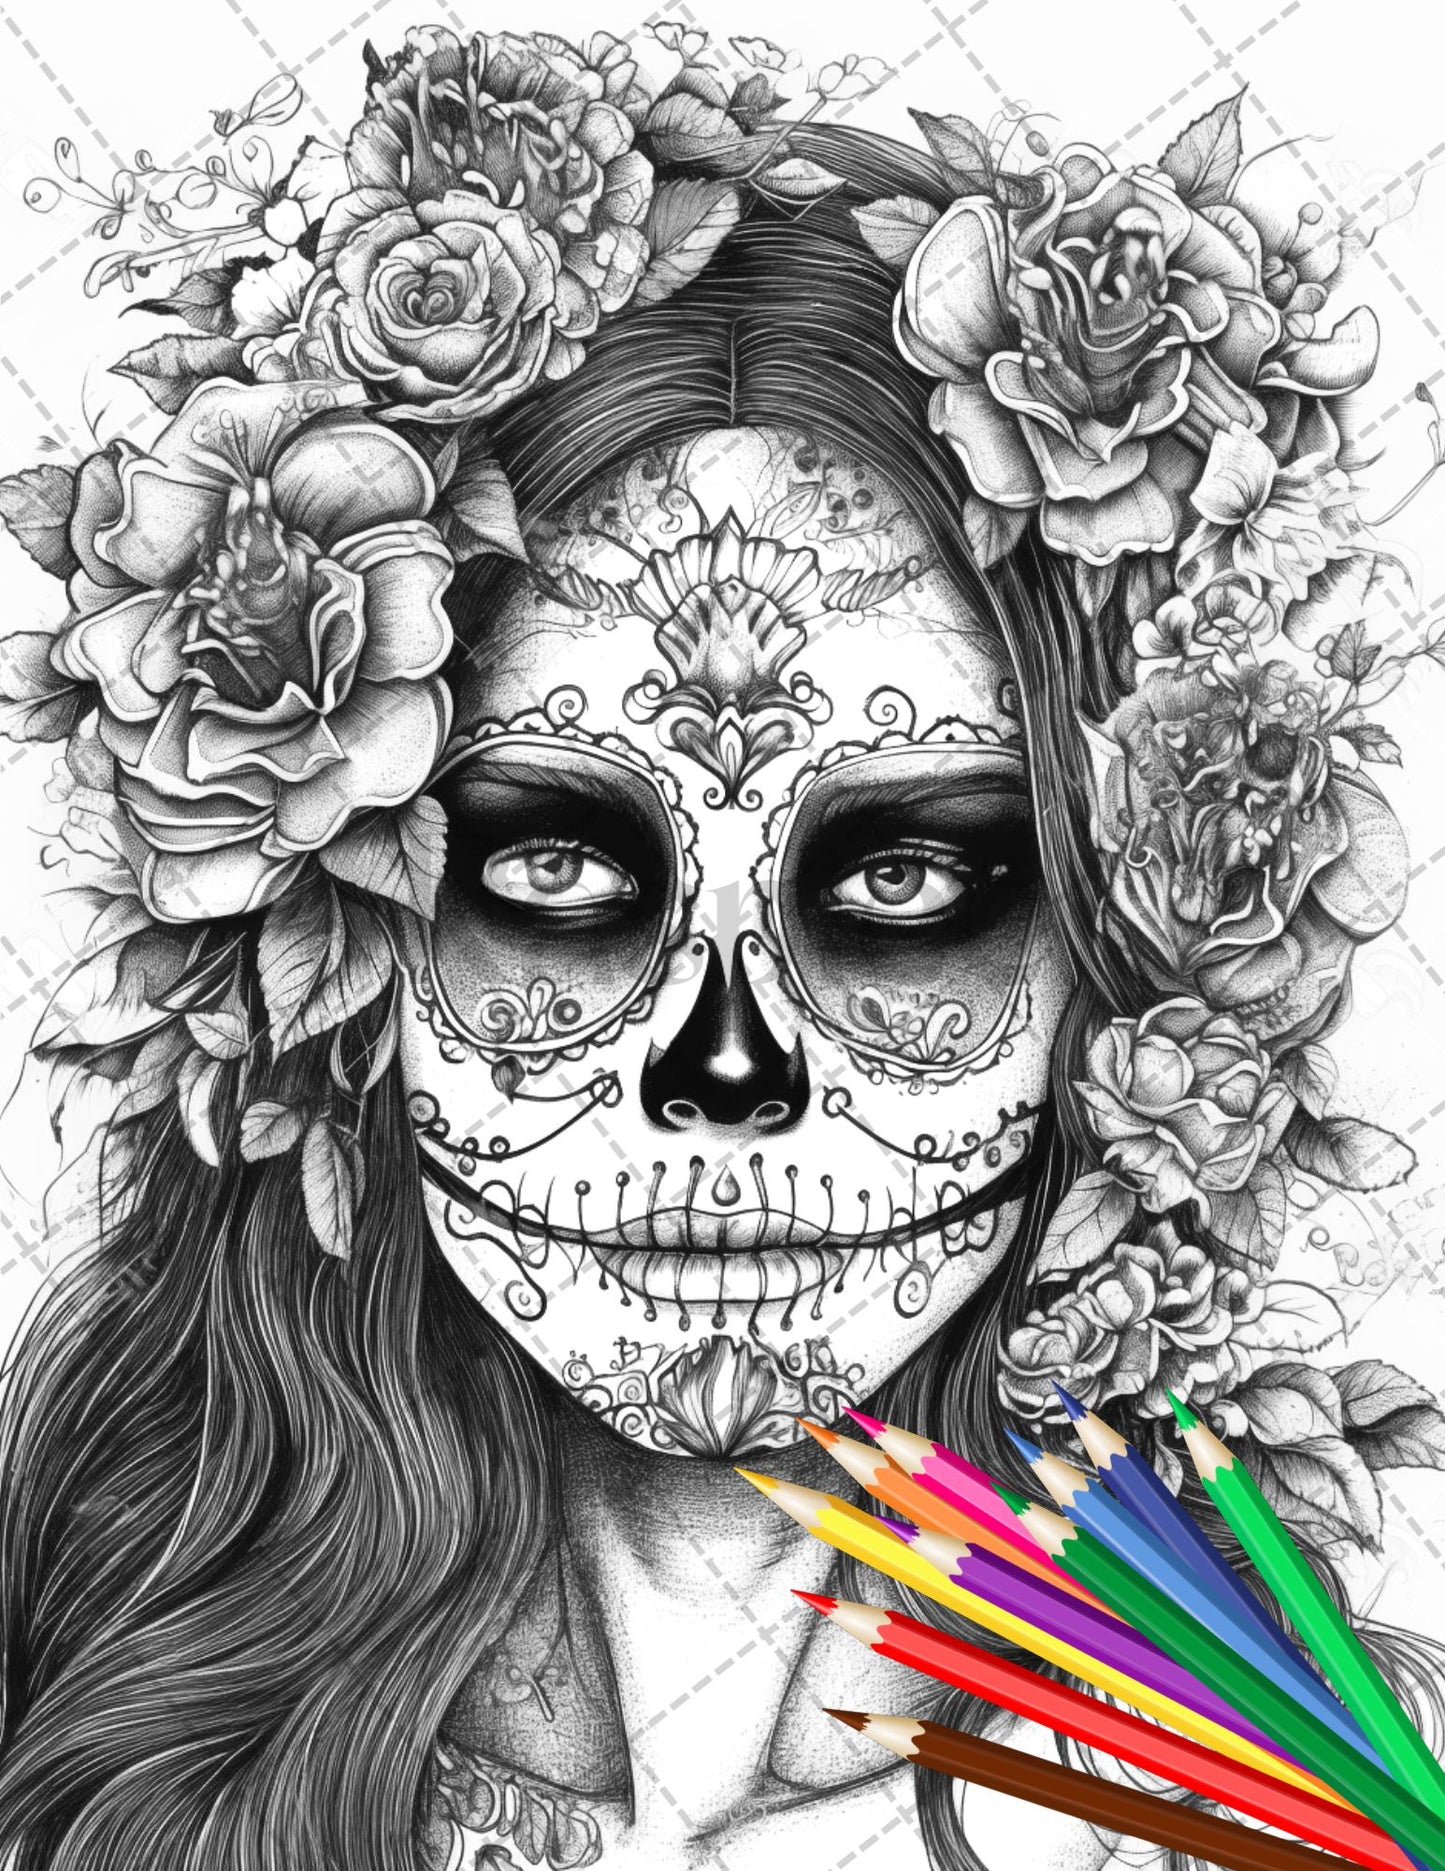 30 Printable Horror Bride Coloring Pages for Adults, Gothic Wedding Grayscale Coloring Book, Instant Download PDF - raspiee